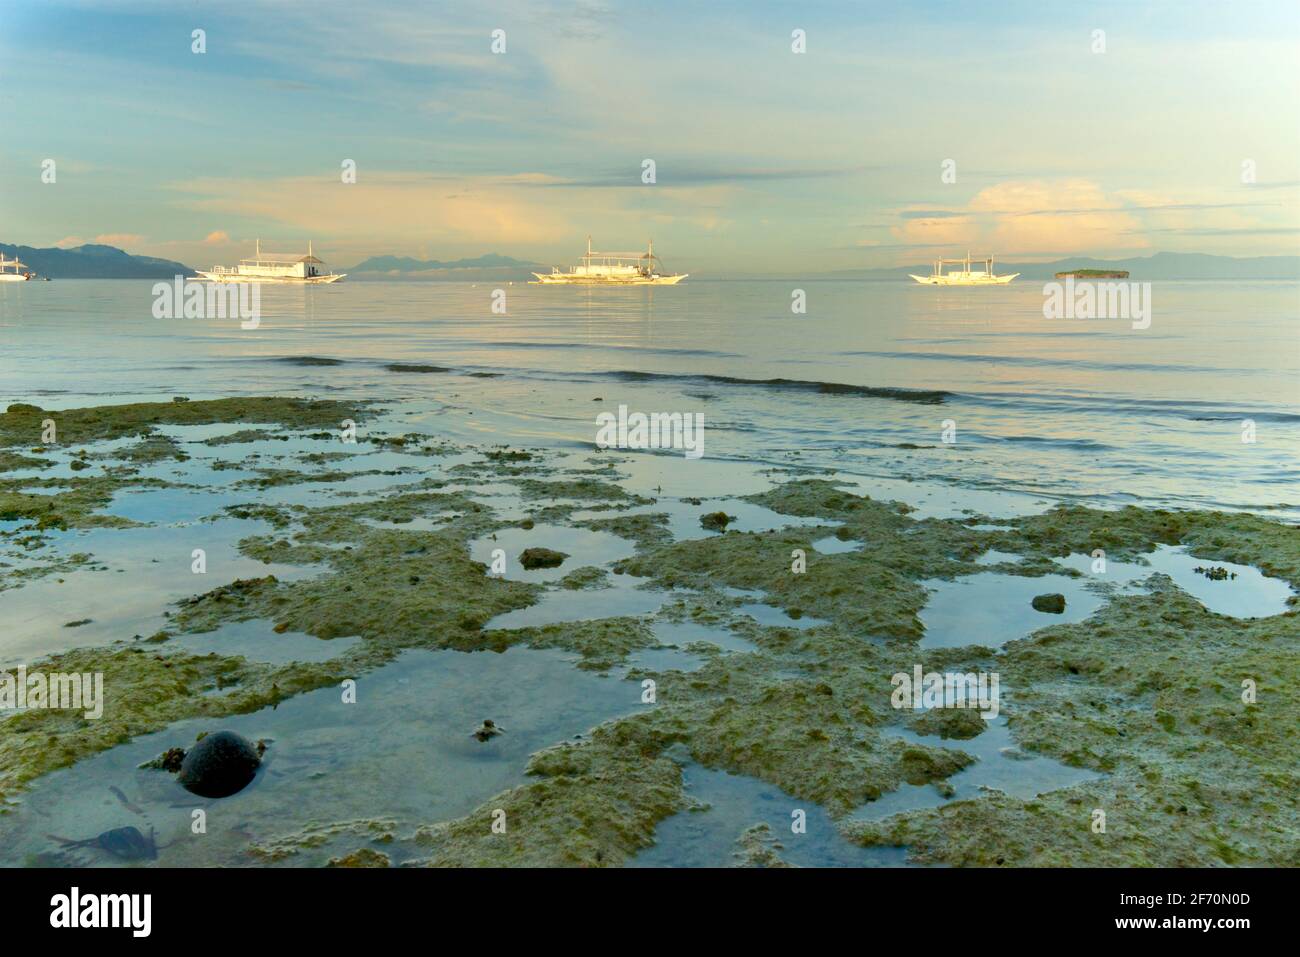 Low tide, Moalboal, Cebu, Central Visayas, Philippines. Dving boats anchored off shore. Stock Photo